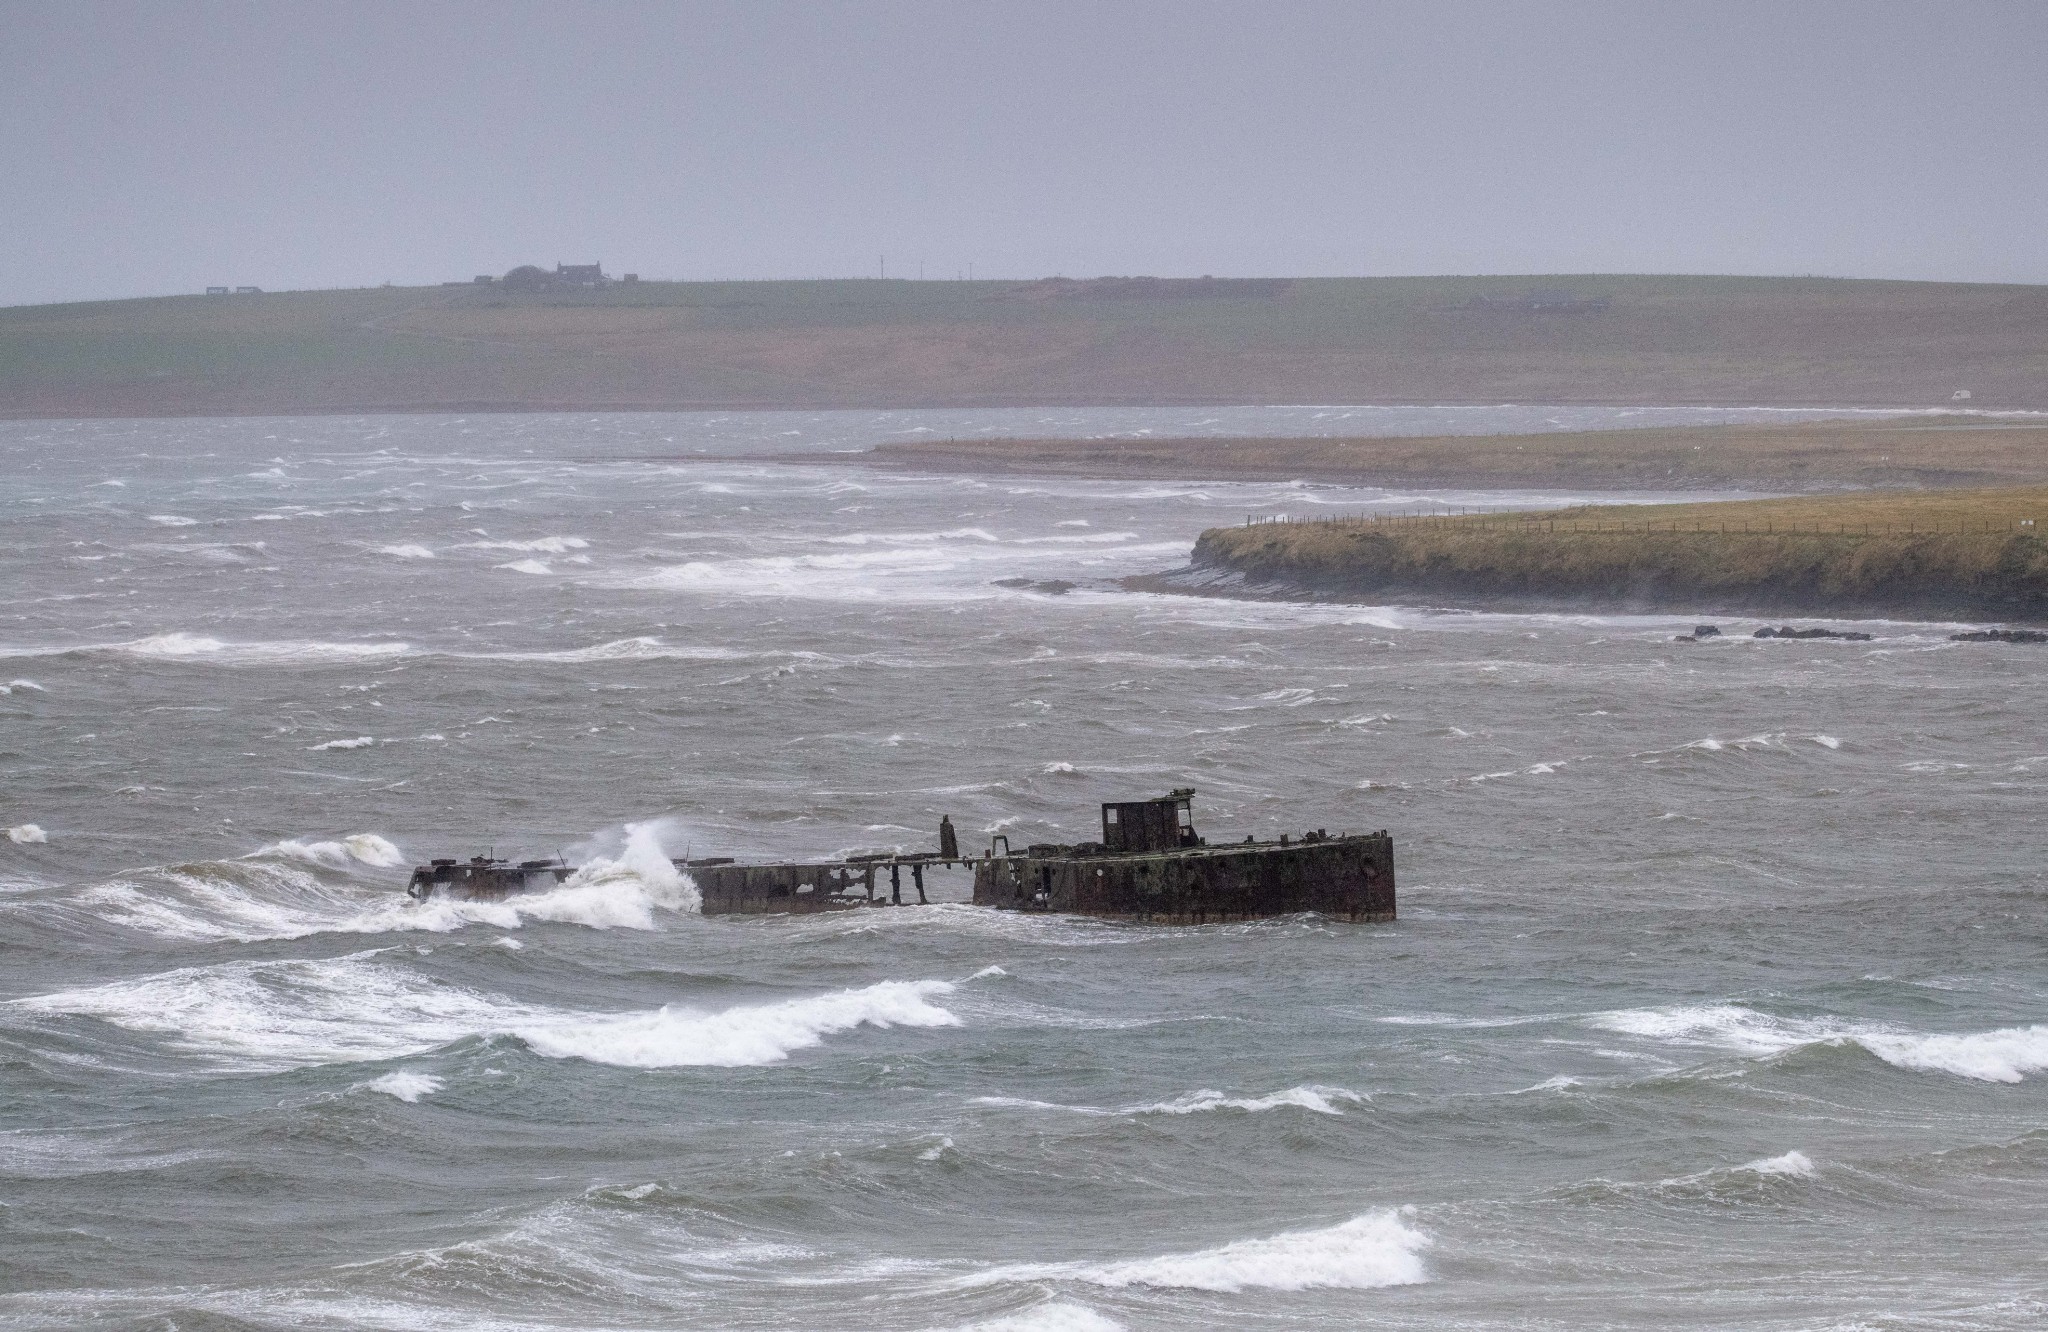 The wreck of the Juanita in Inganess bay, Orkney - image by Raymond Besant